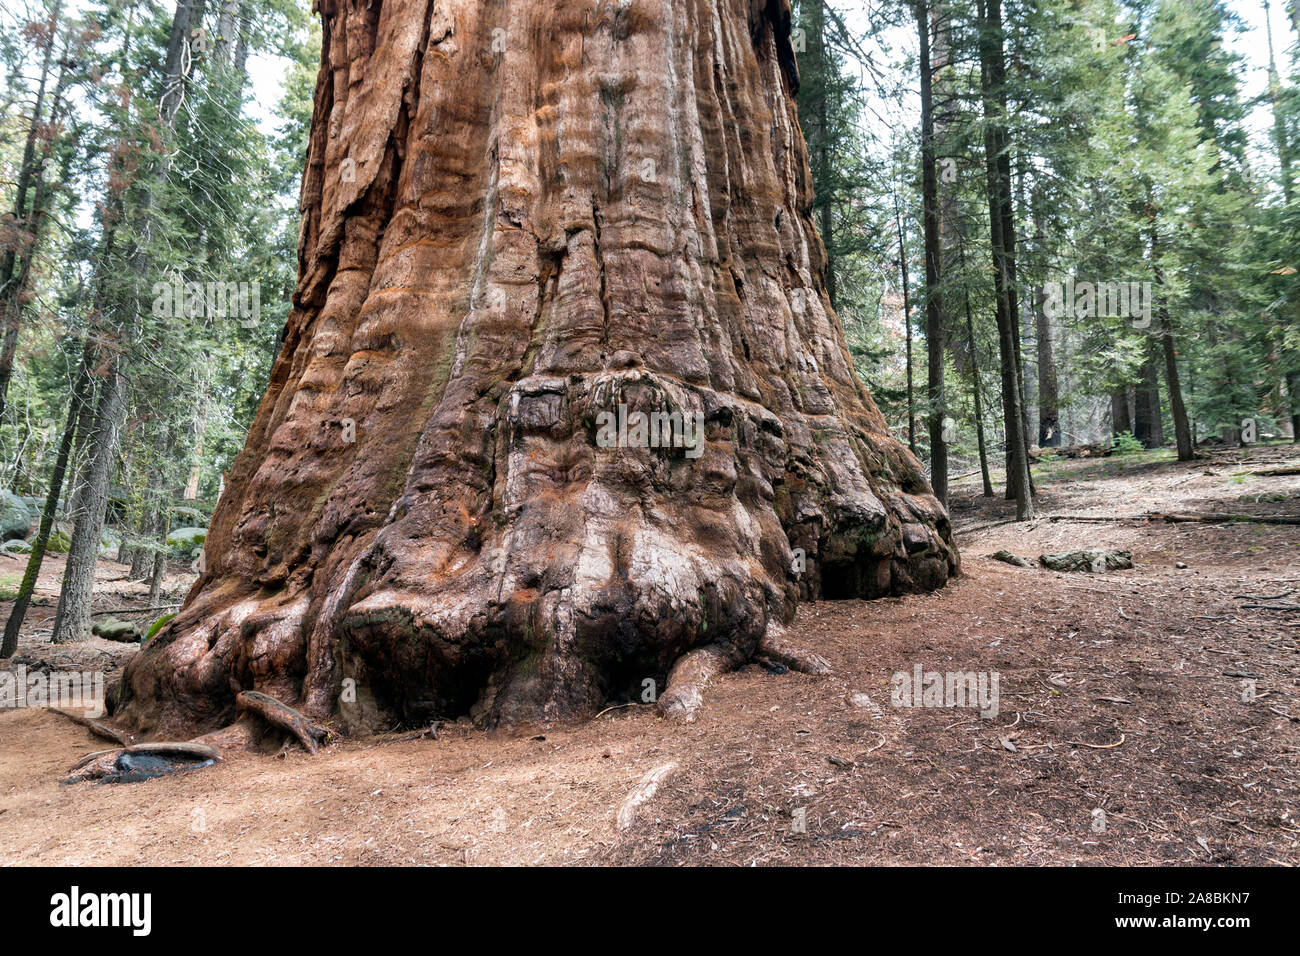 Giant Sequoia trees in the giant forest of Sequoia National Park (California). Stock Photo